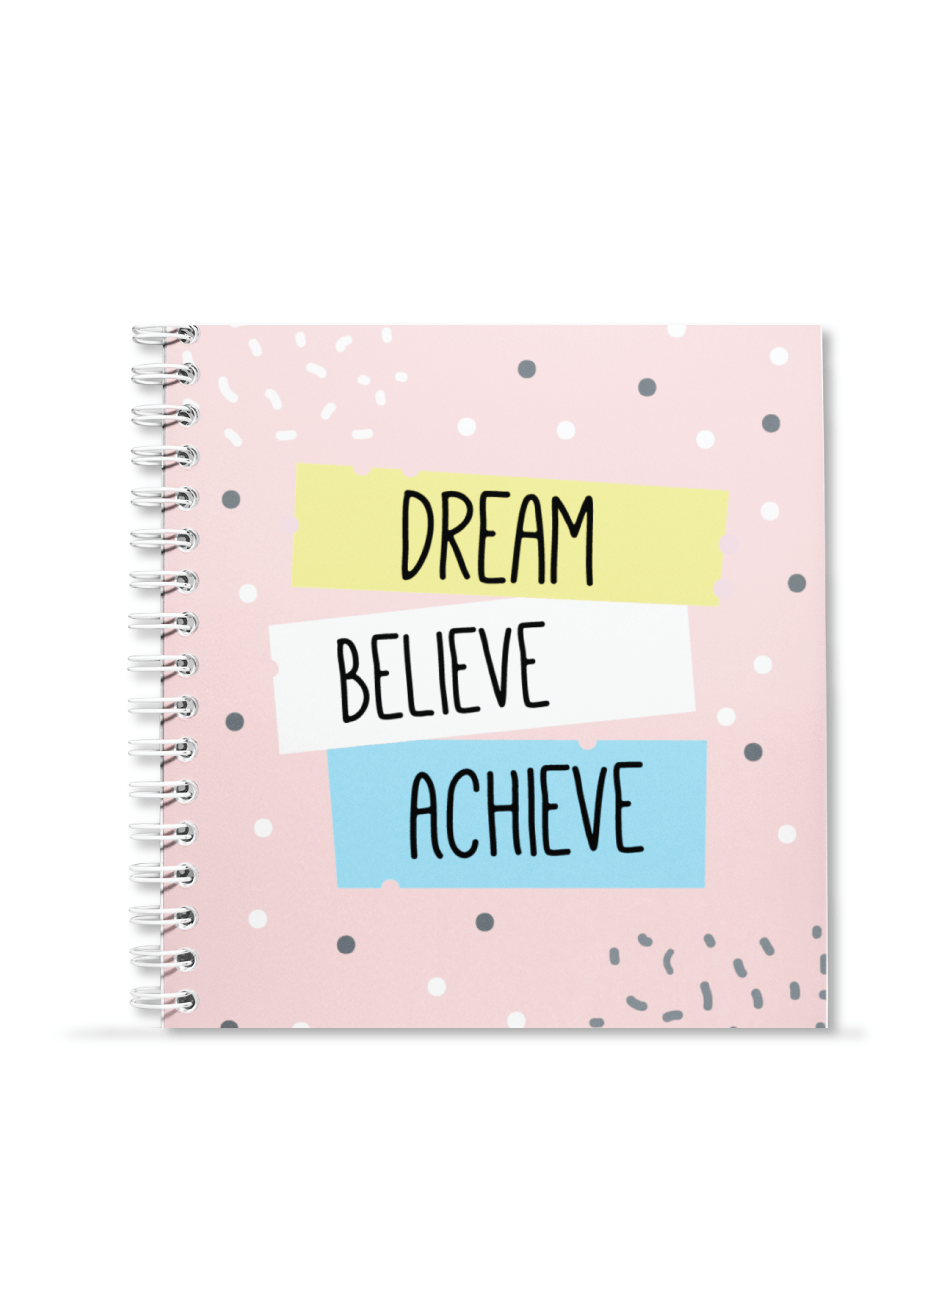 Dream Believe Achieve Notebook | Available in various sizes